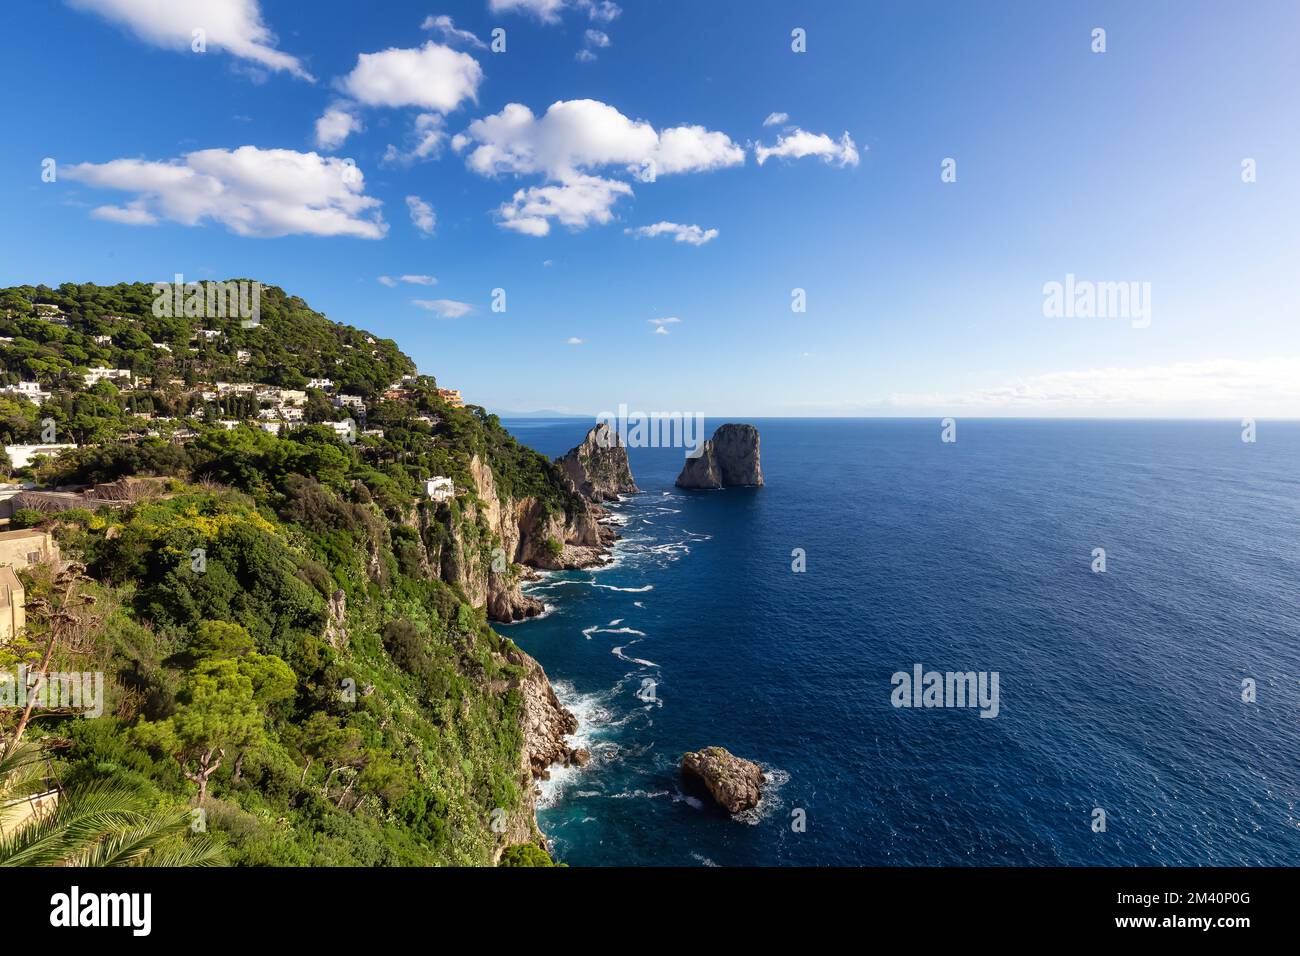 Rocky Coast by Sea at Touristic Town on Capri Island in Bay of Naples, Italy Stock Photo